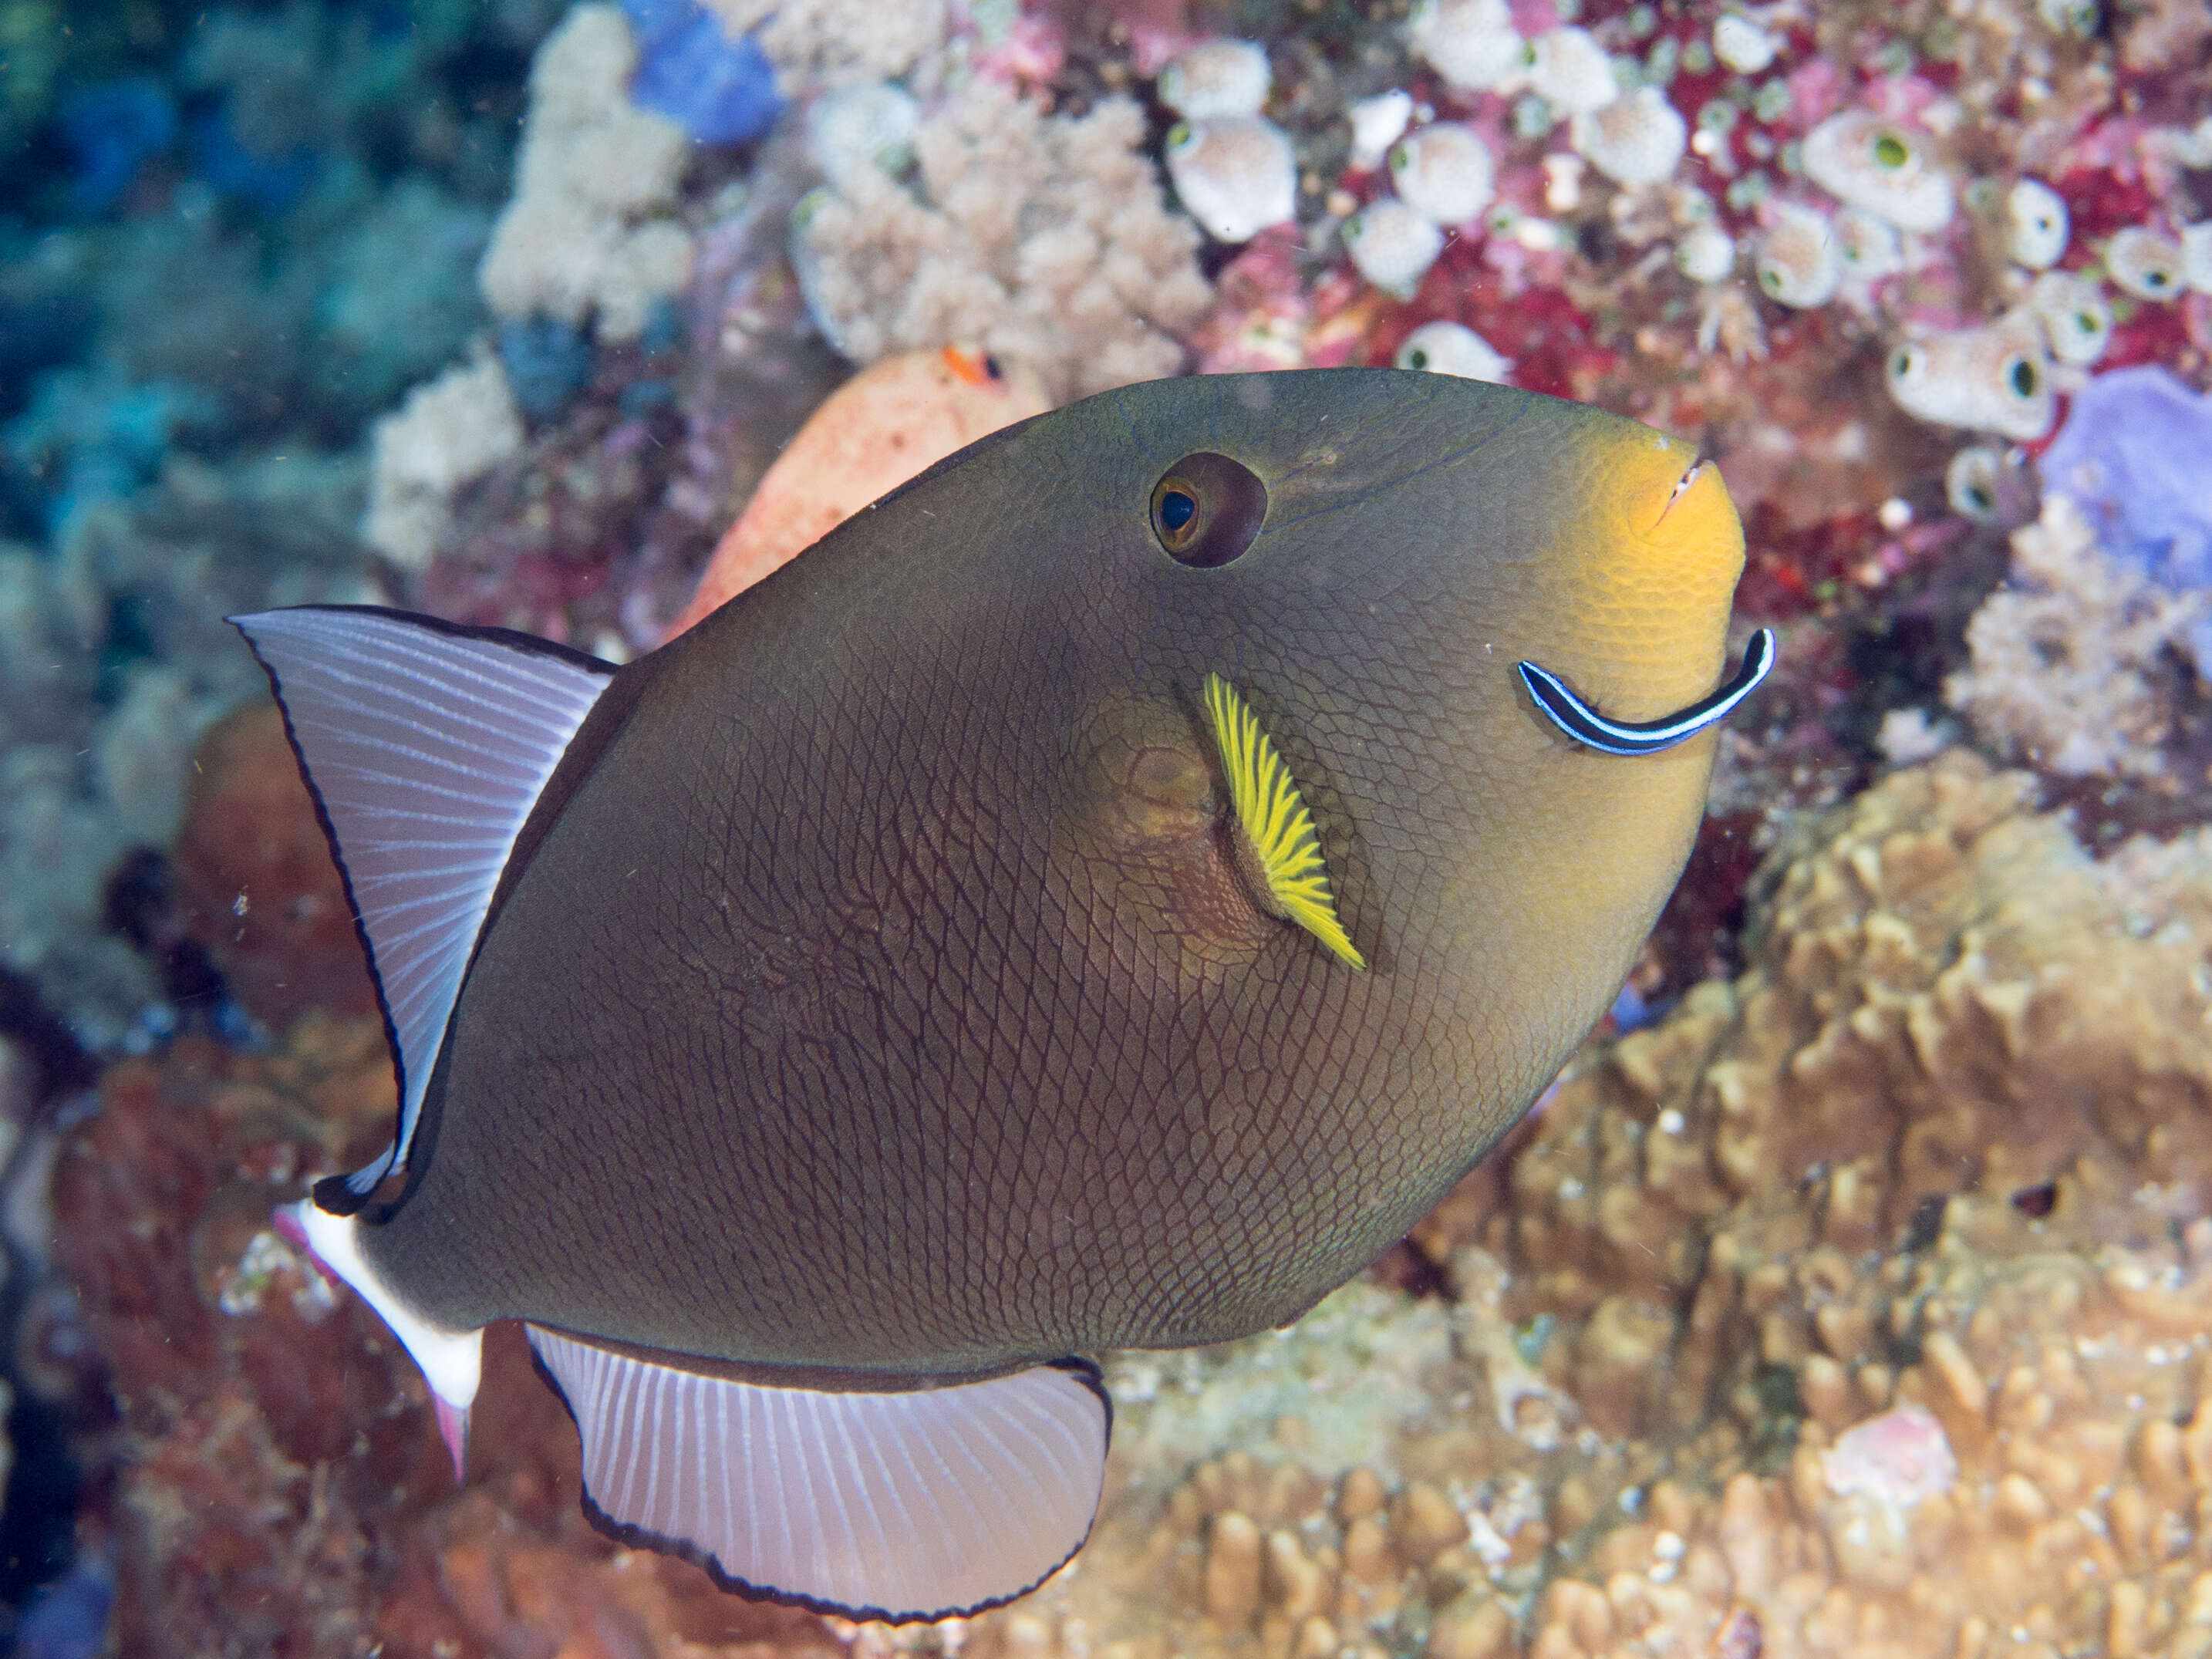 Image of Pinktail triggerfish